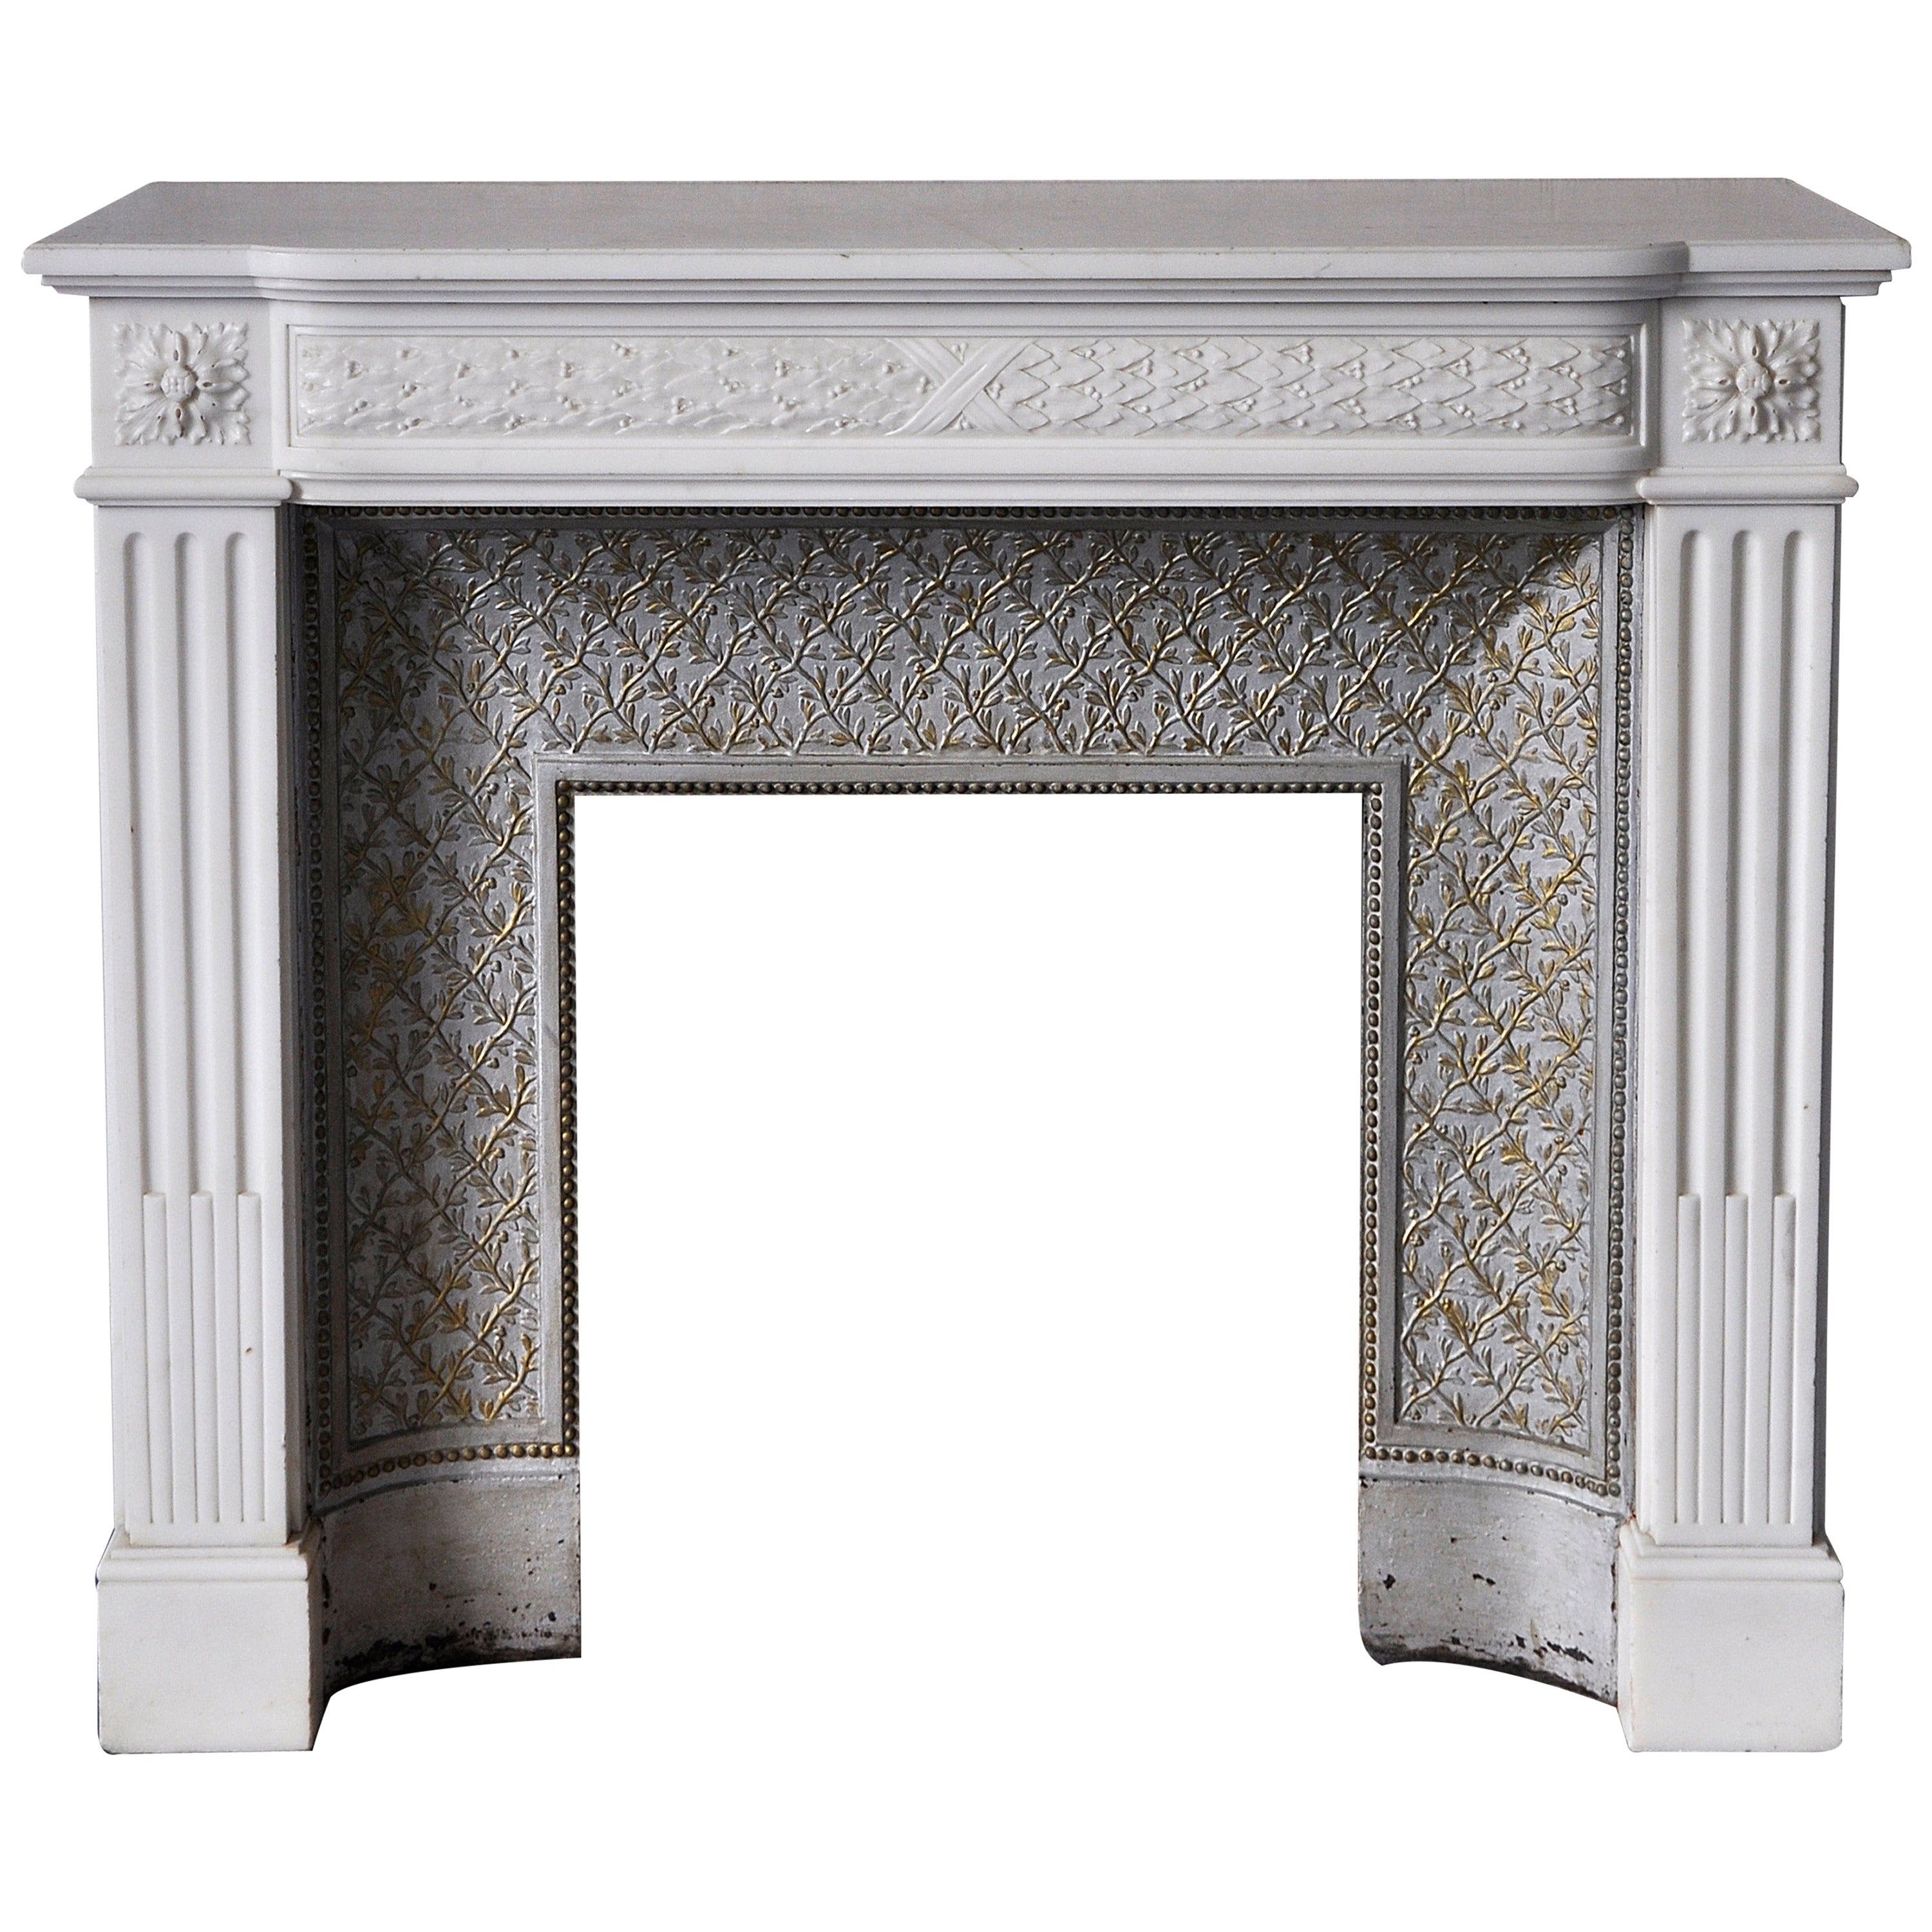 Antique Louis XVI Style Fireplace in Statuary Carrara Marble, 19th Century